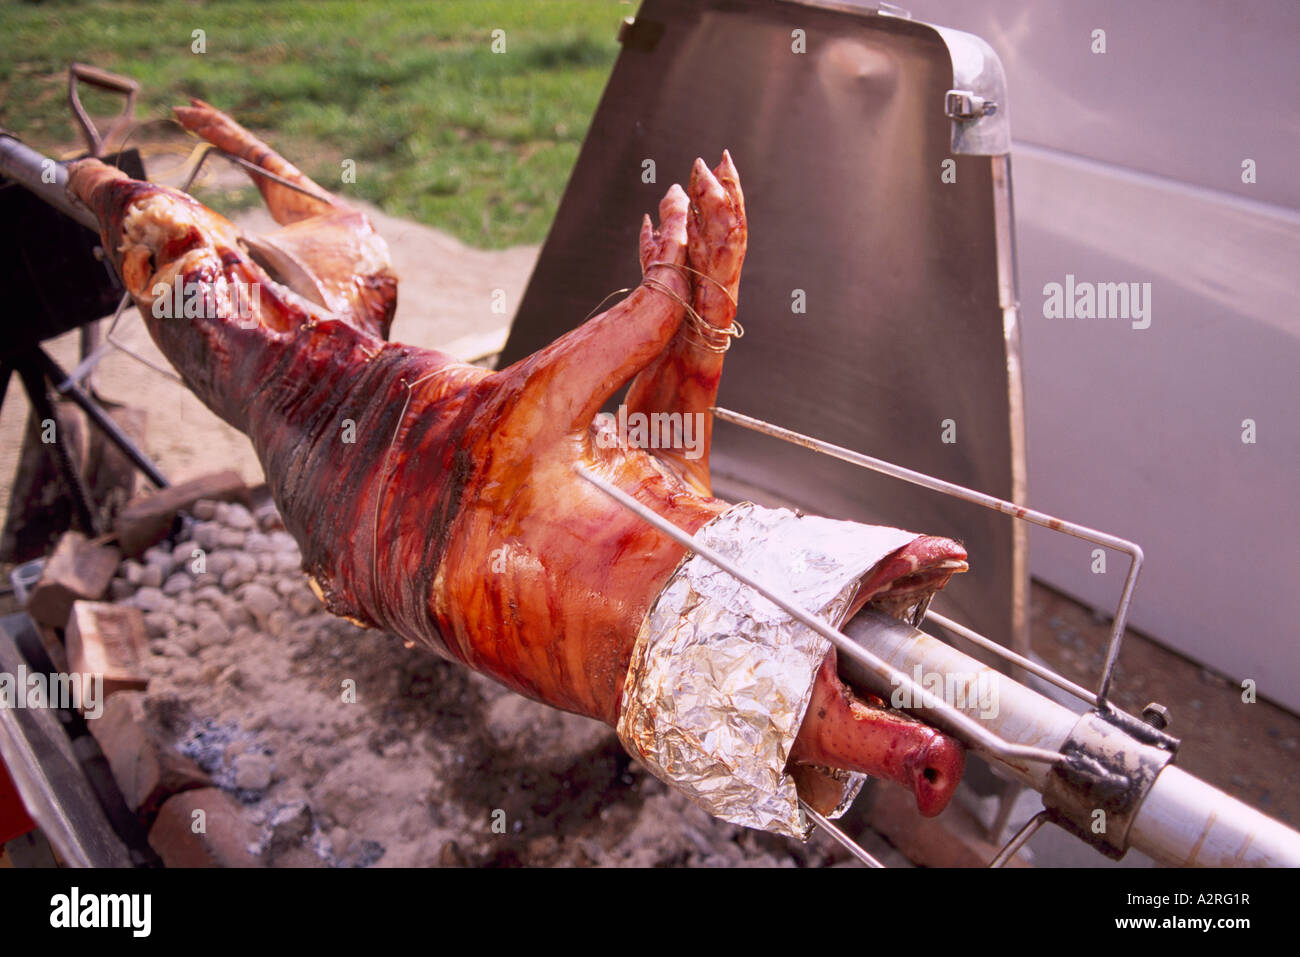 Pig Roast - Hog skewered on a Rotisserie Spit and rotating and roasting over an Open Fire Pit Stock Photo